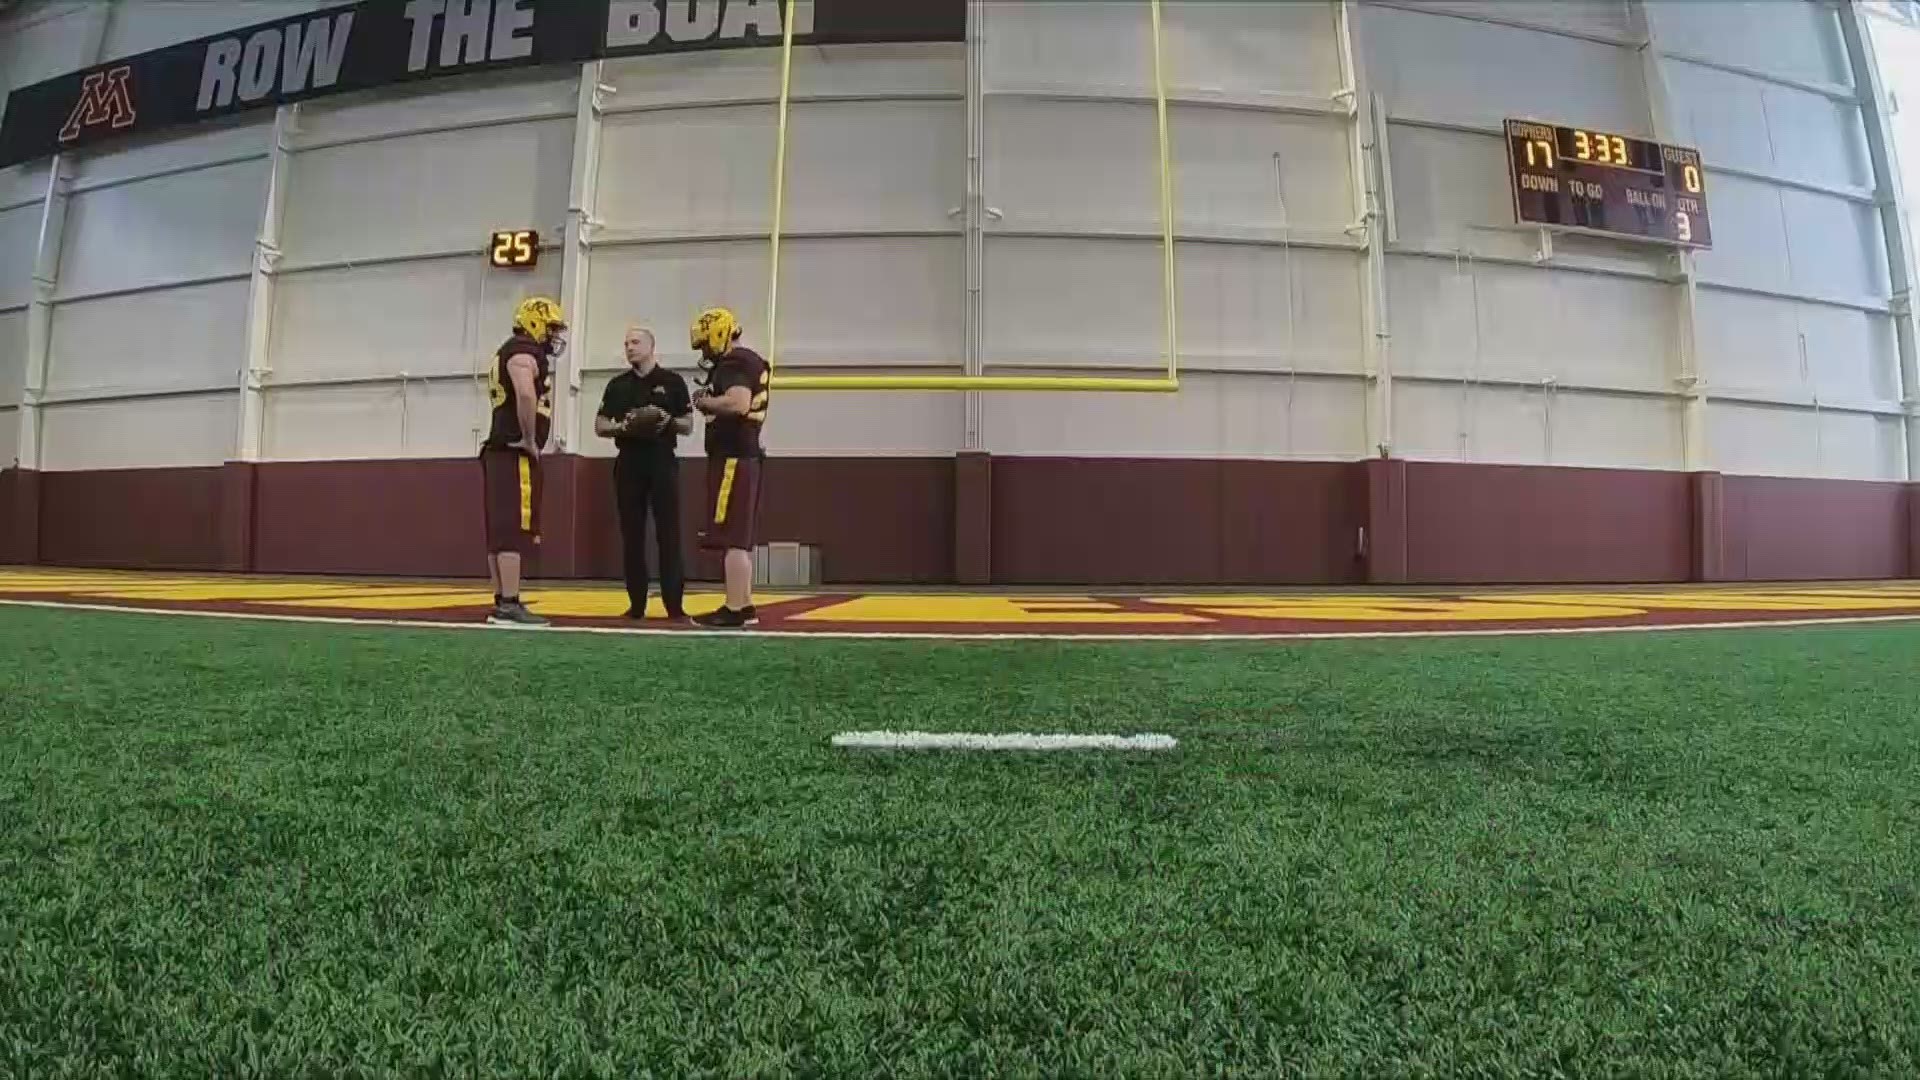 Dave Schwartz and Ryan Shaver spent more time with PJ Fleck than we could squeeze into one KARE 11 Sports segment.  See for yourself how 'How Hard Can It Be' went from start-to-finish at the Gophers Football practice facility.